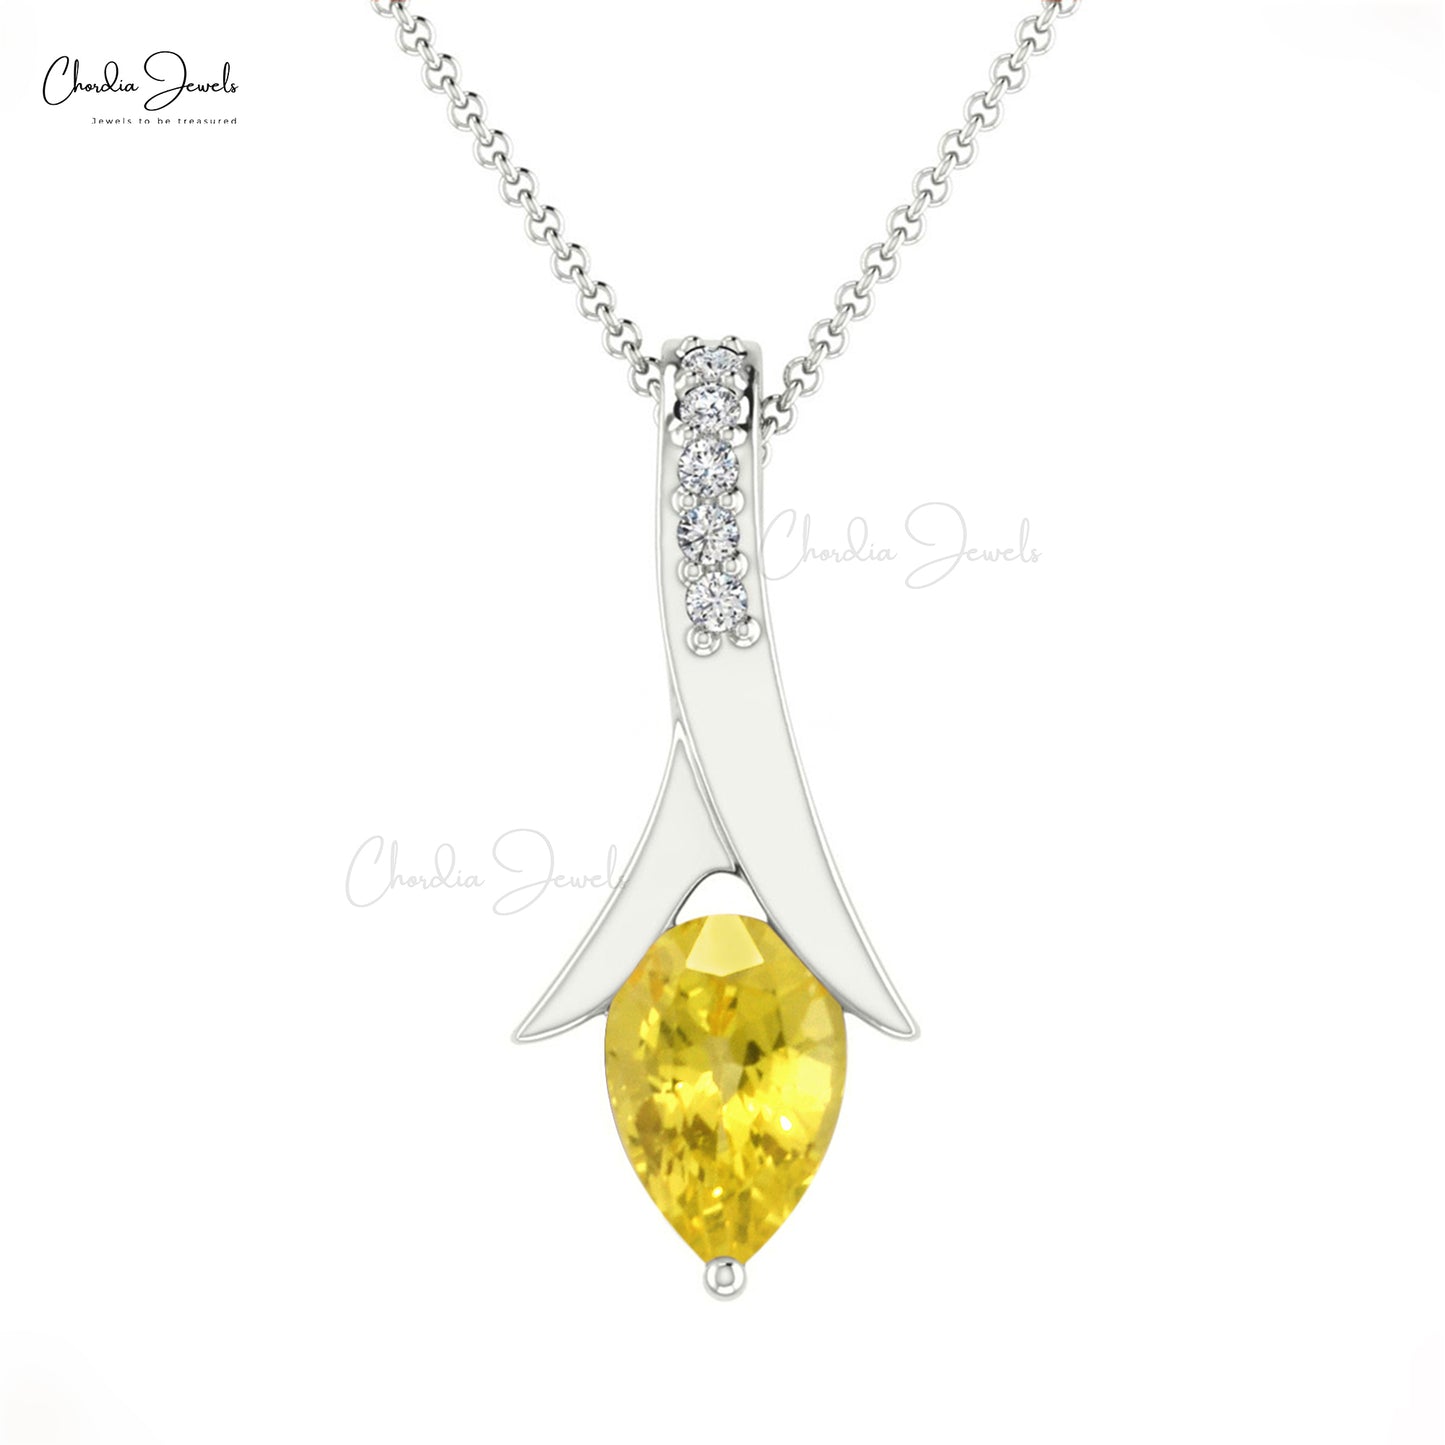 Natural Yellow Sapphire Pendant 14k Solid Gold White Diamond Tear Drop Pendant 0.35 Cts Pear Cut Handmade Gemstone Jewelry For For Women's